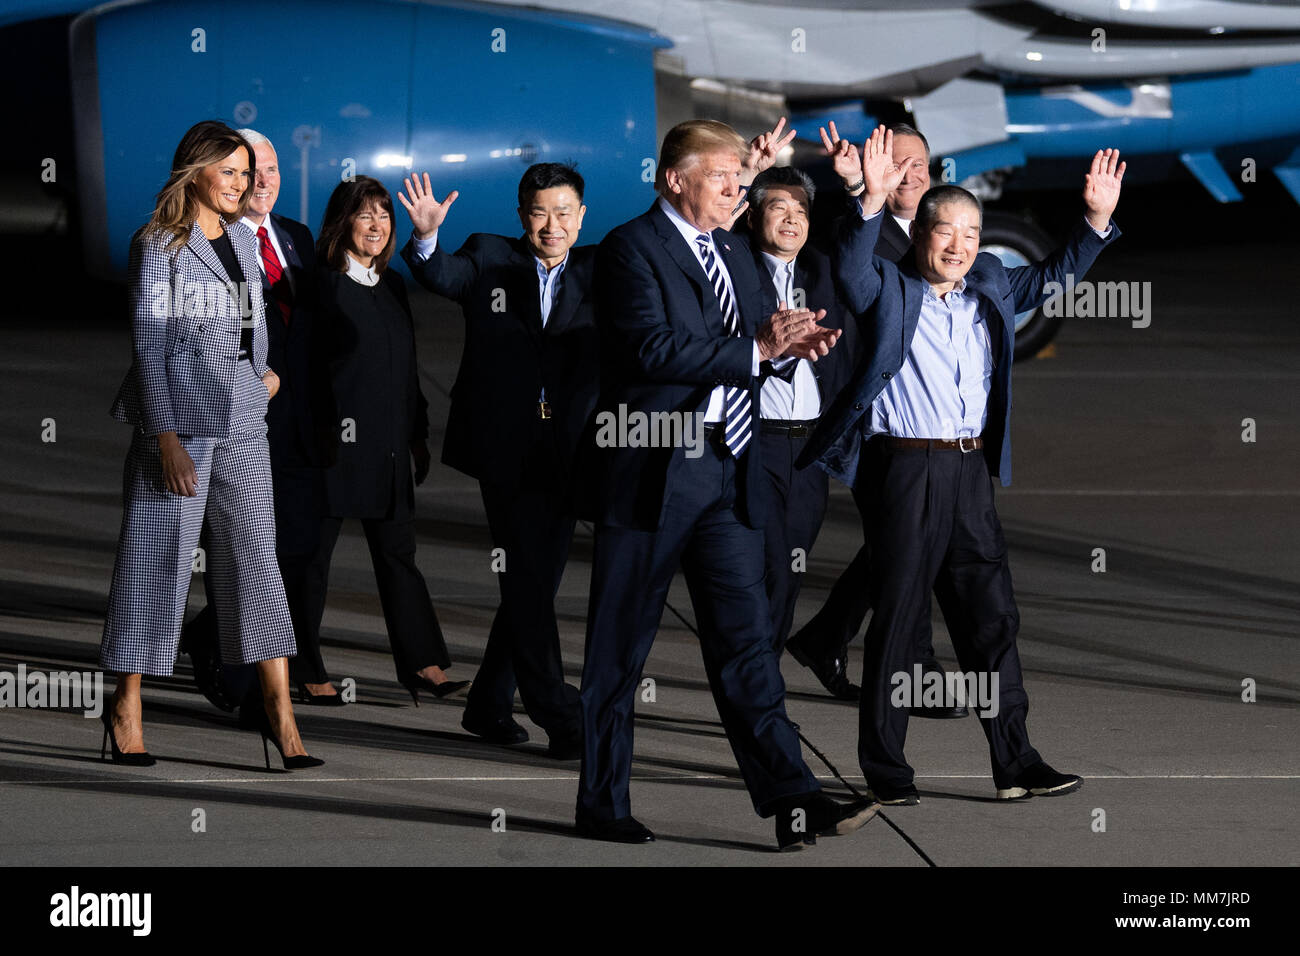 President Donald Trump and his wife Melania leaving the plane with the three American detainees (Kim Dong-chul, Kim Hak-song, and Tony Kim) held in captivity in North Korea along with Secretary of State Mike Pompeo, at Joint Base Andrews in Suitland. Stock Photo